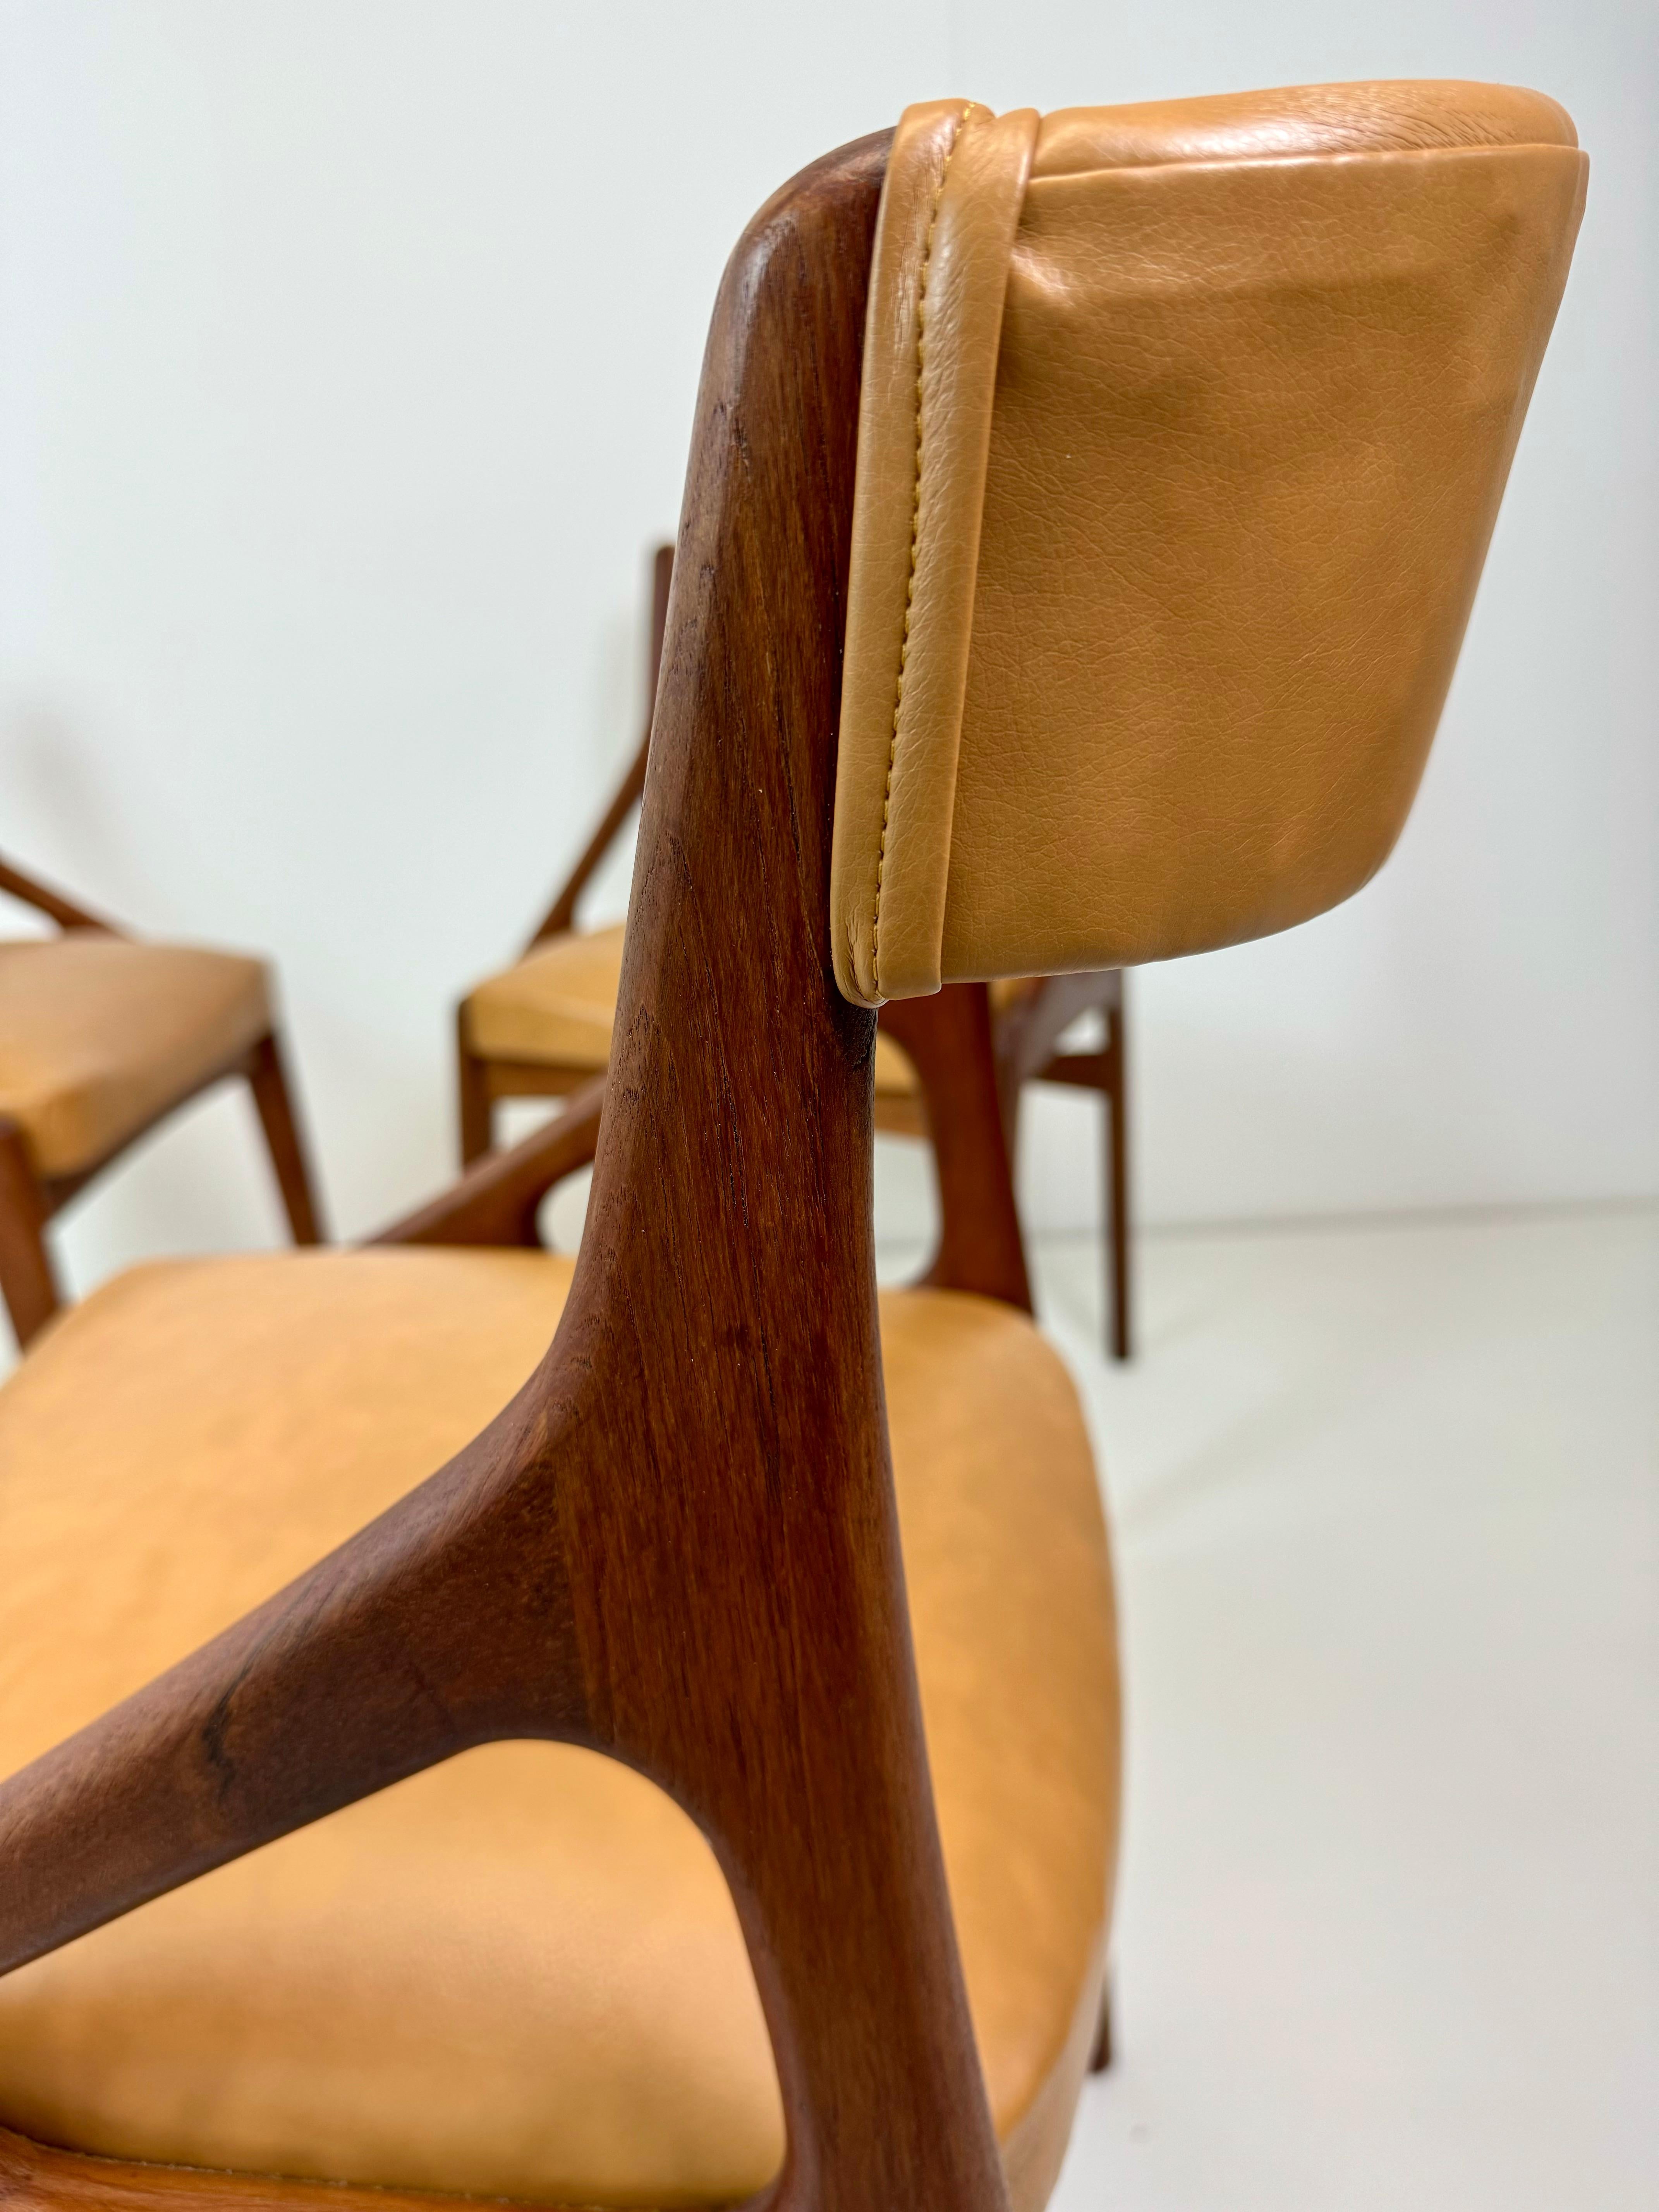 Set of Four Midcentury Modern Teak and Leatherette Dining Chairs c.1960's For Sale 1